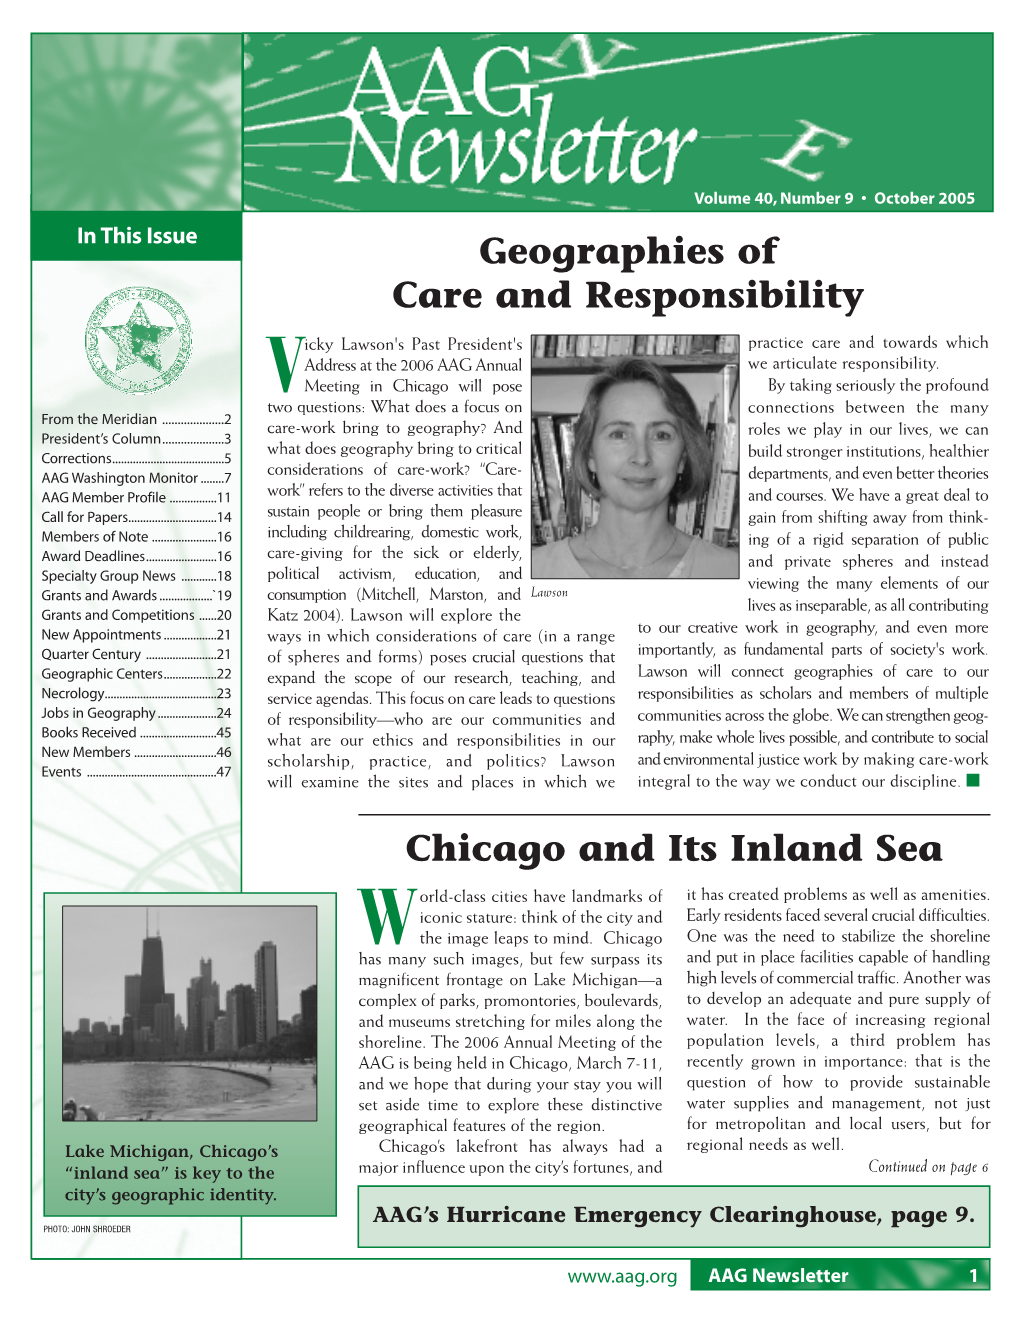 Geographies of Care and Responsibility Chicago and Its